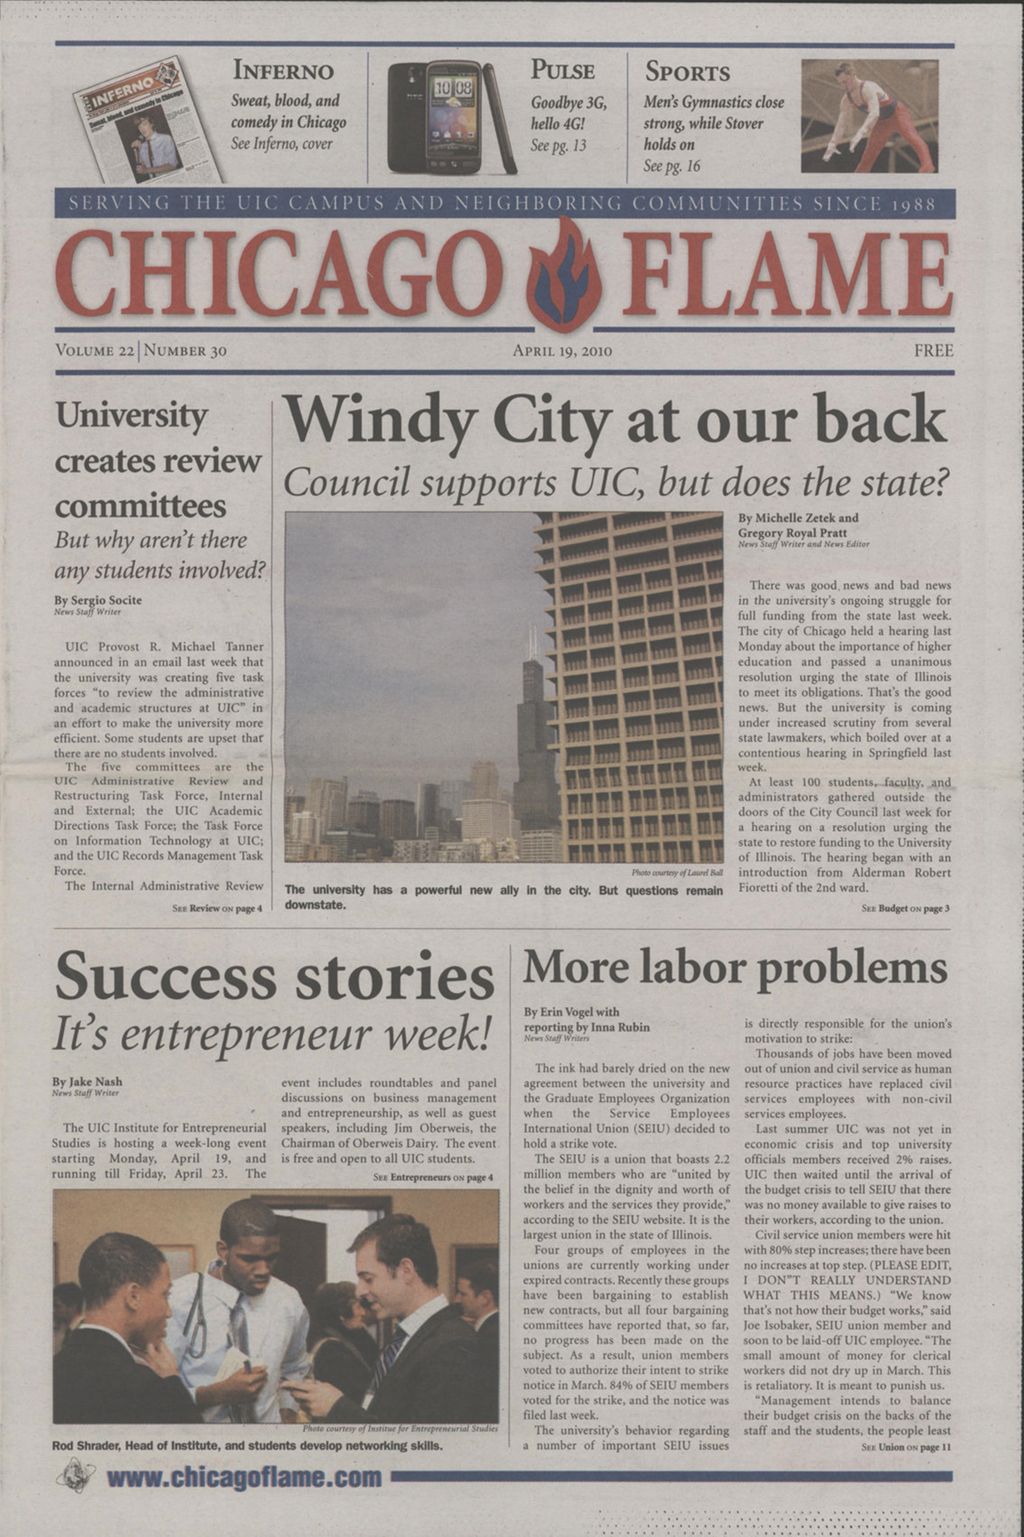 Miniature of Chicago Flame (April 19, 2010)